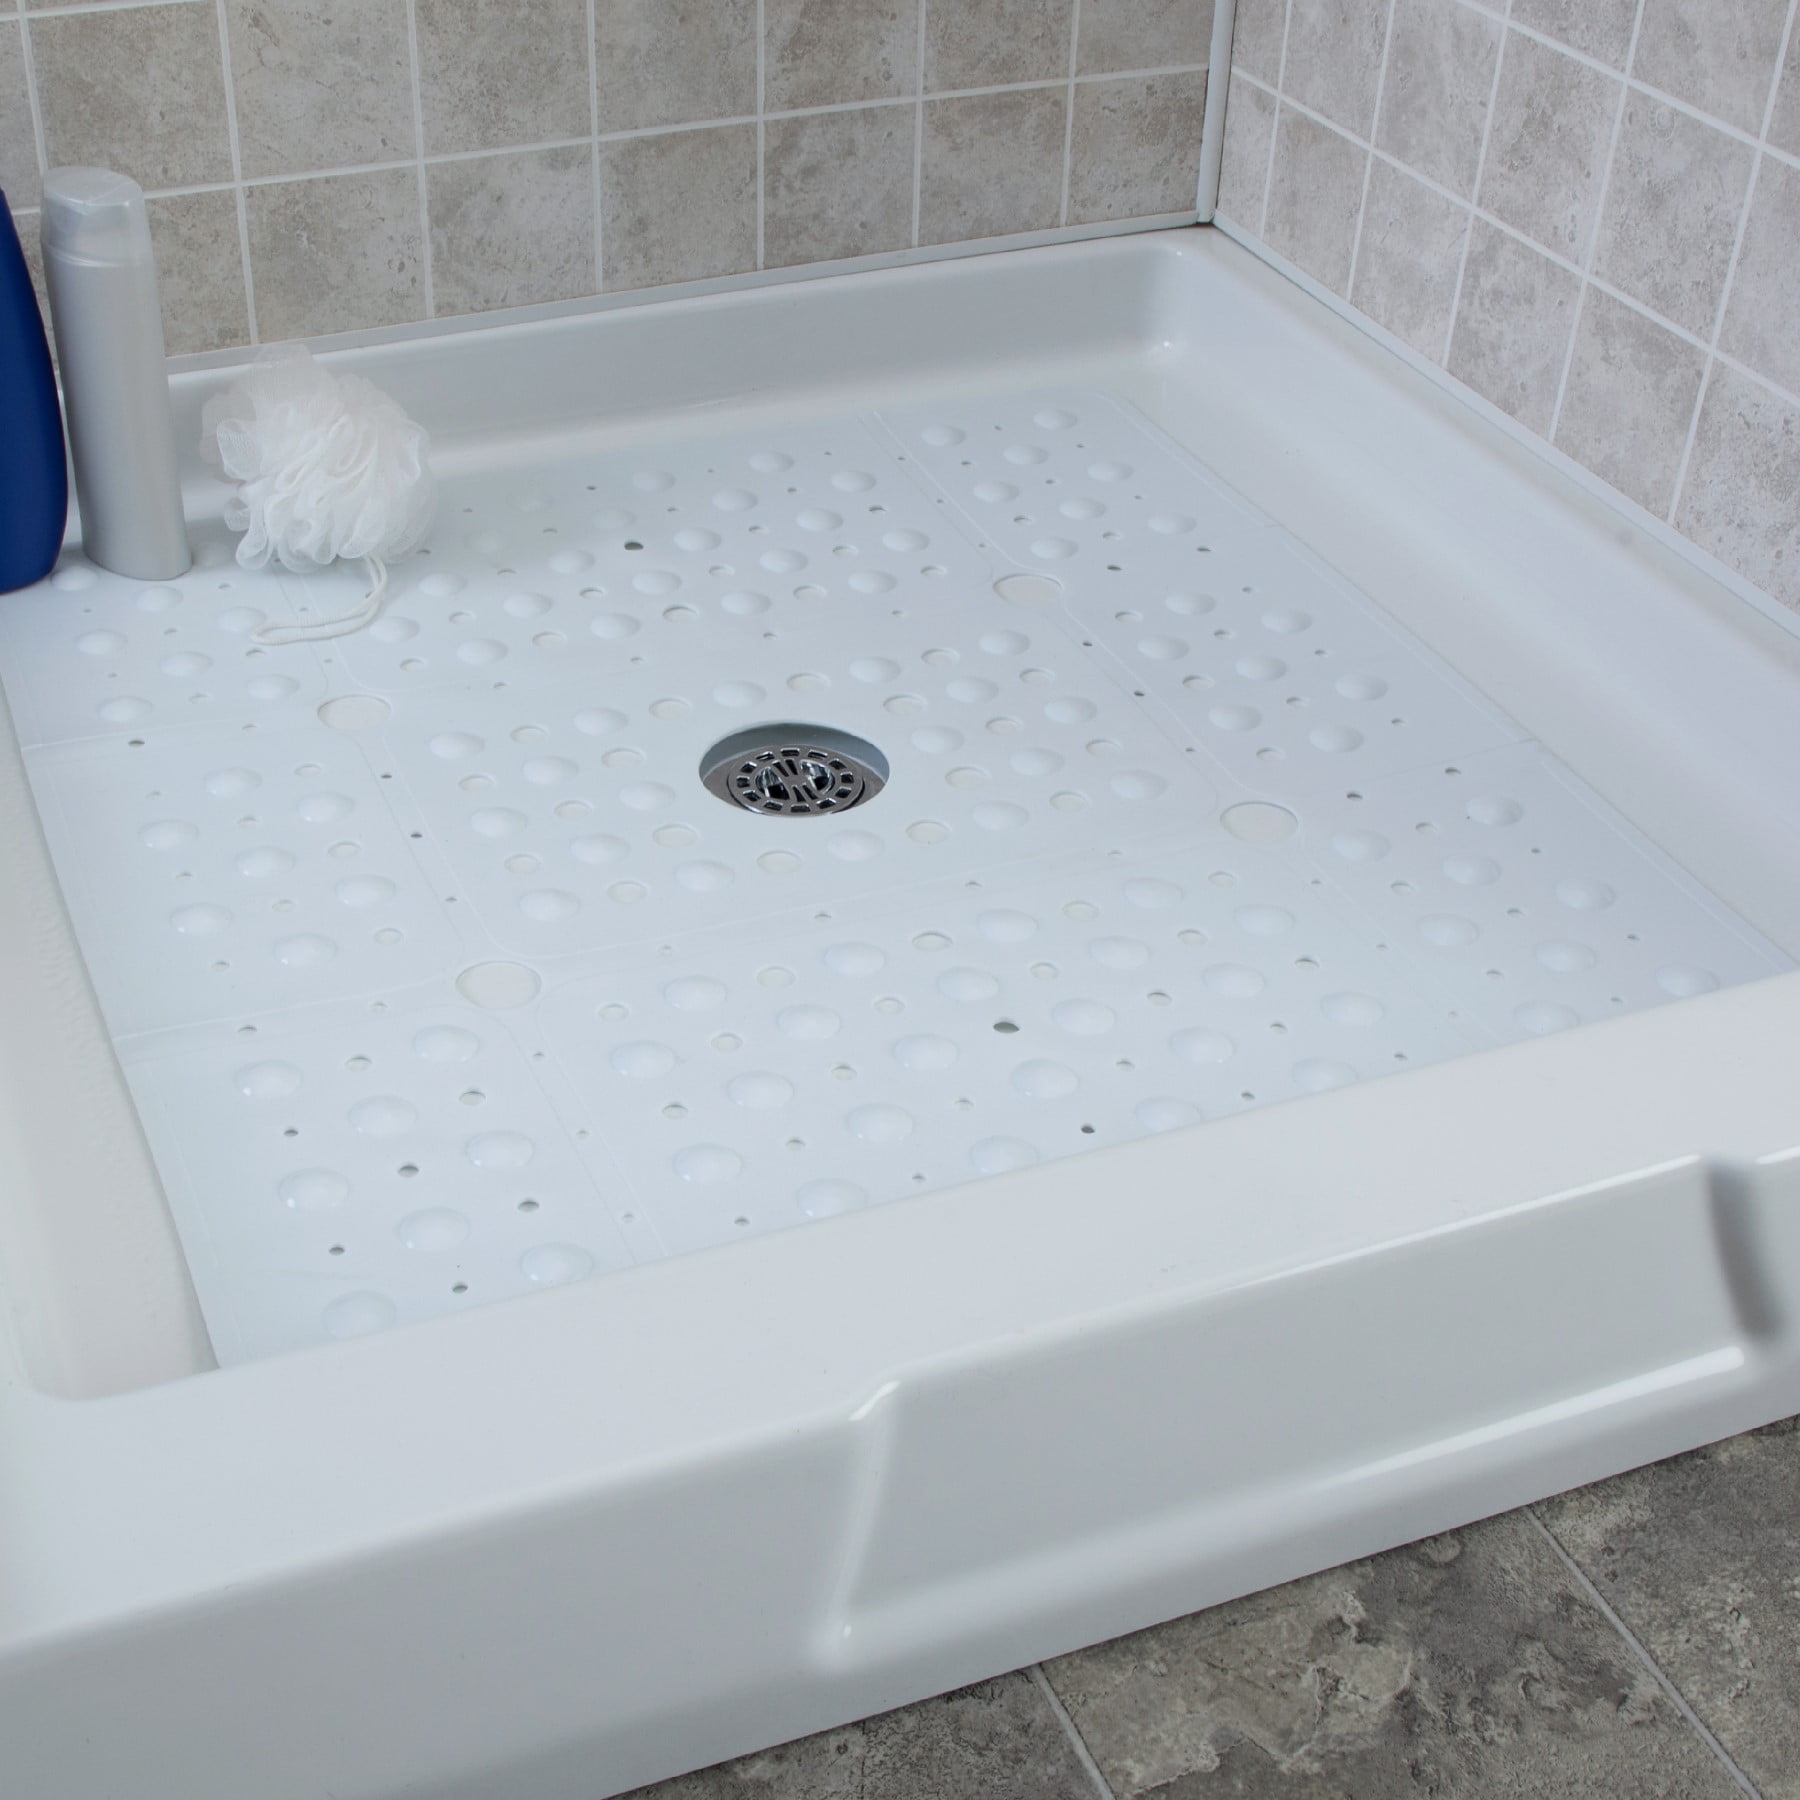 SlipX Solutions 14 in. x 22 in. Medium Rubber Safety Bath Mat with